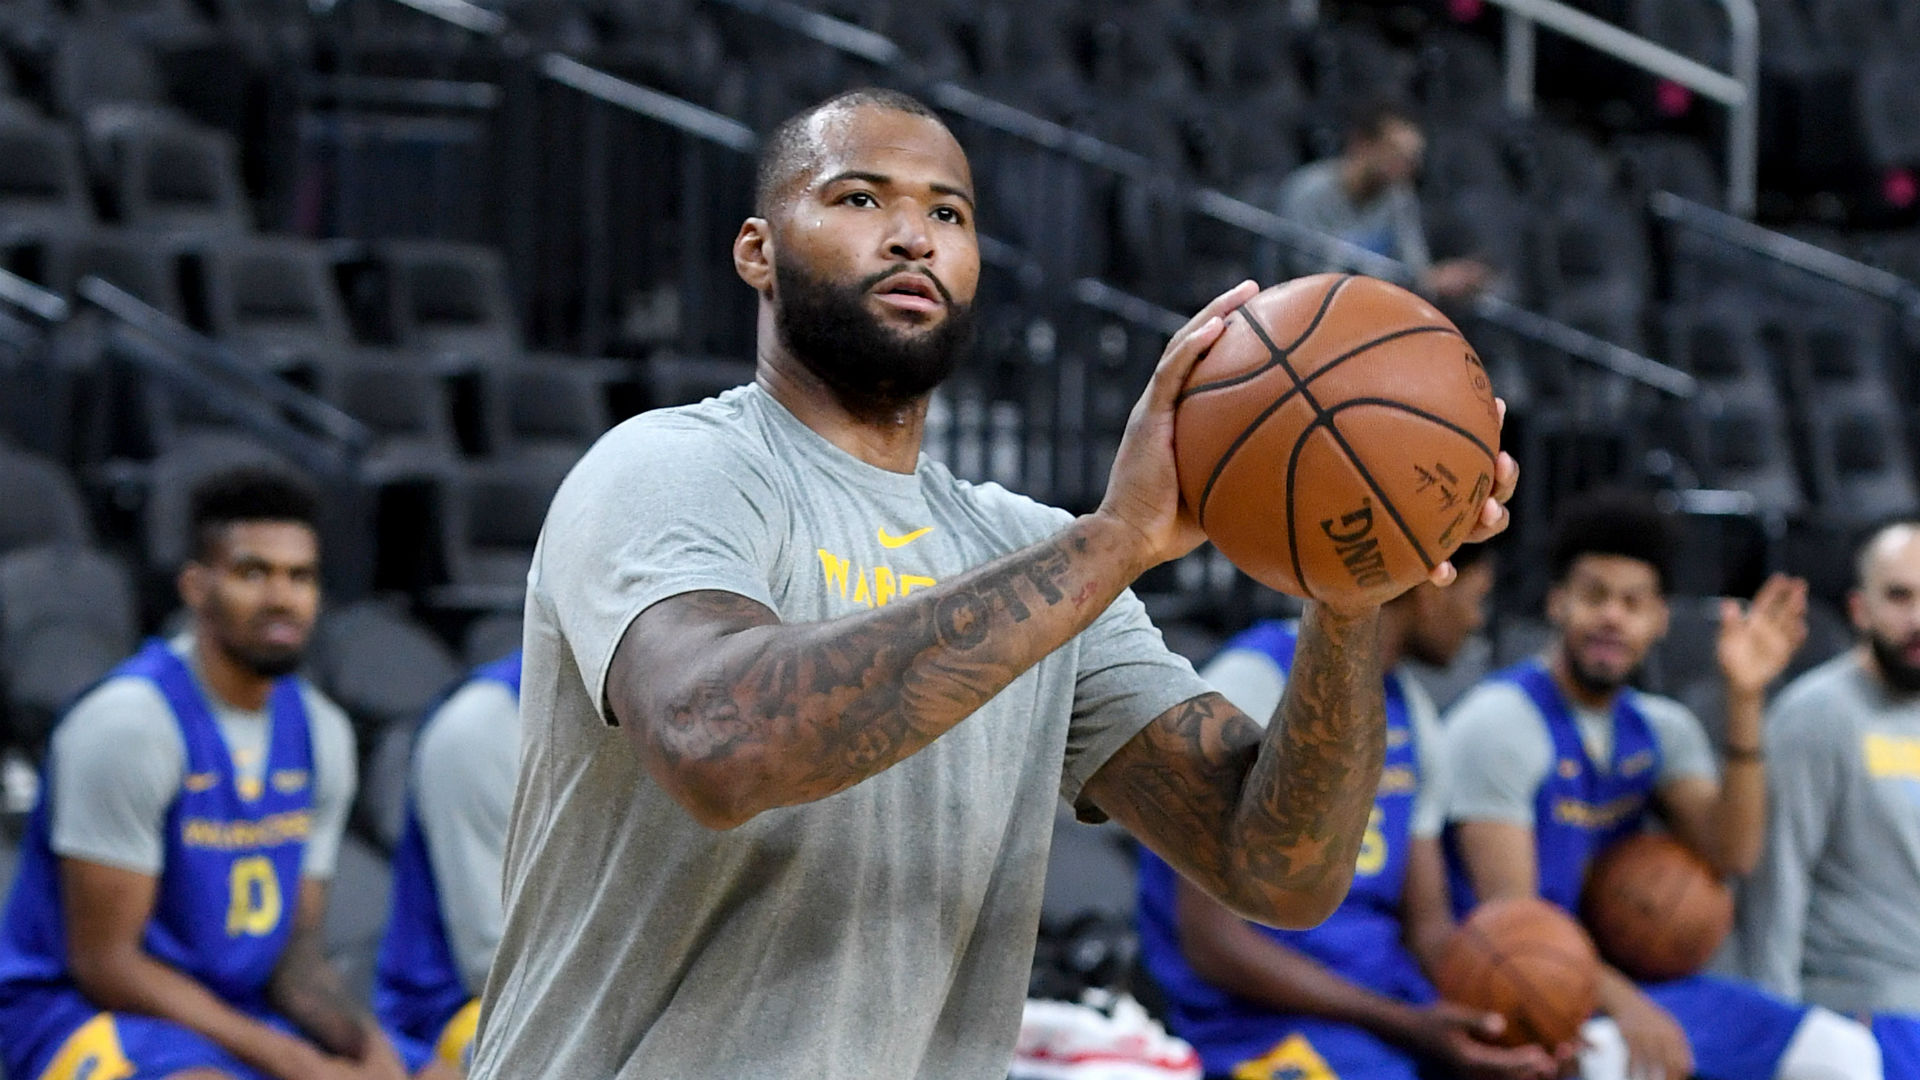 Golden State Warriors fans finally saw recruit DeMarcus Cousins in action on Friday.